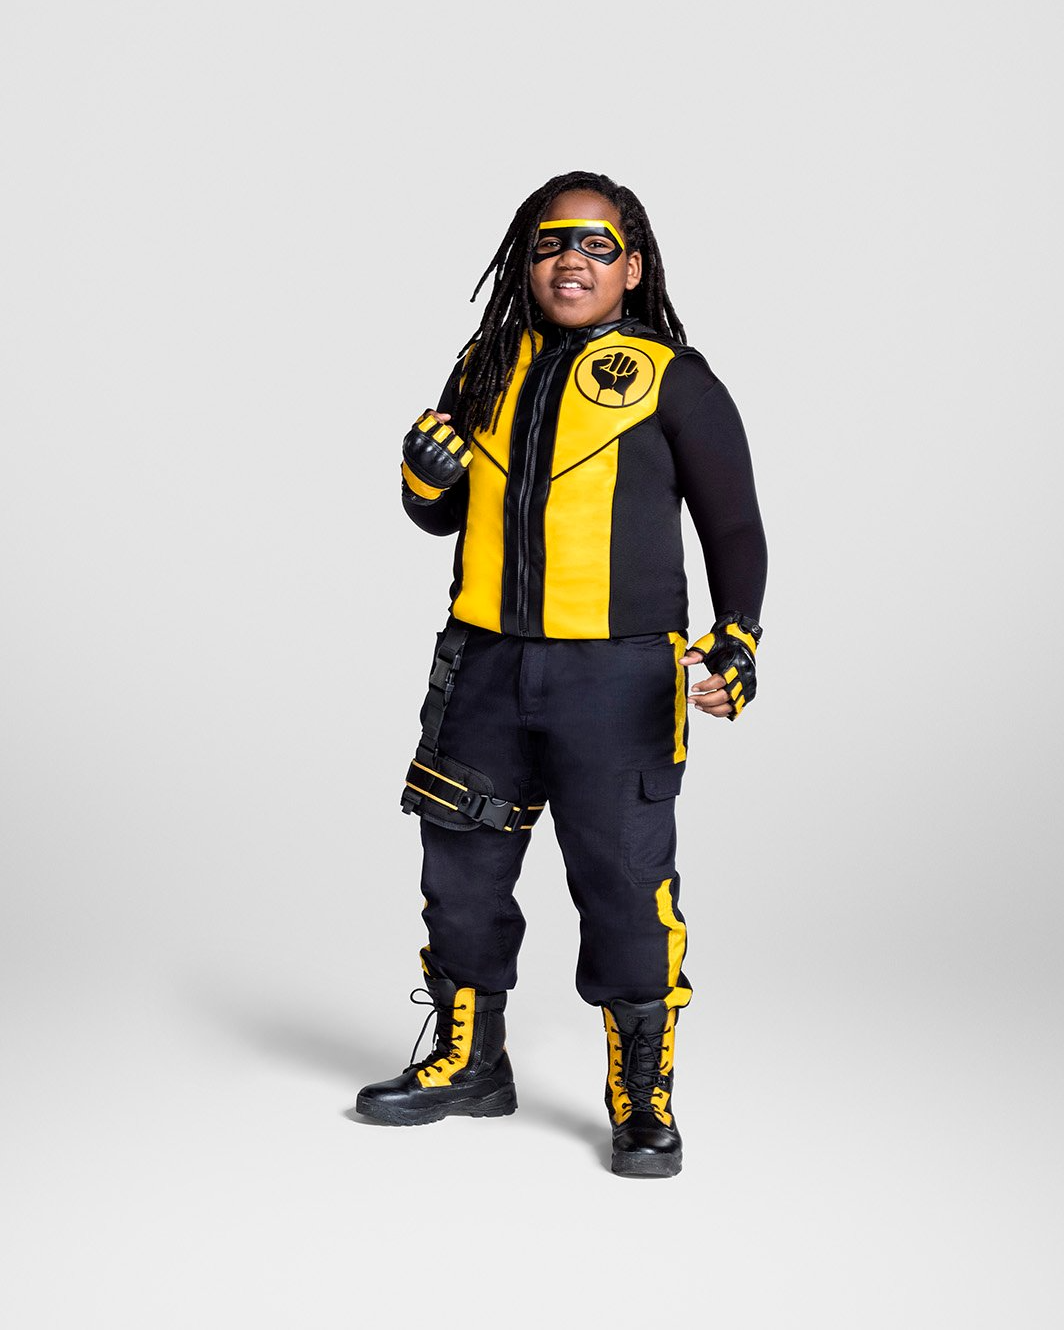 Terrence Little-Gardenhigh in Nickelodeon&rsquo;s &ldquo;Danger Force&rdquo;